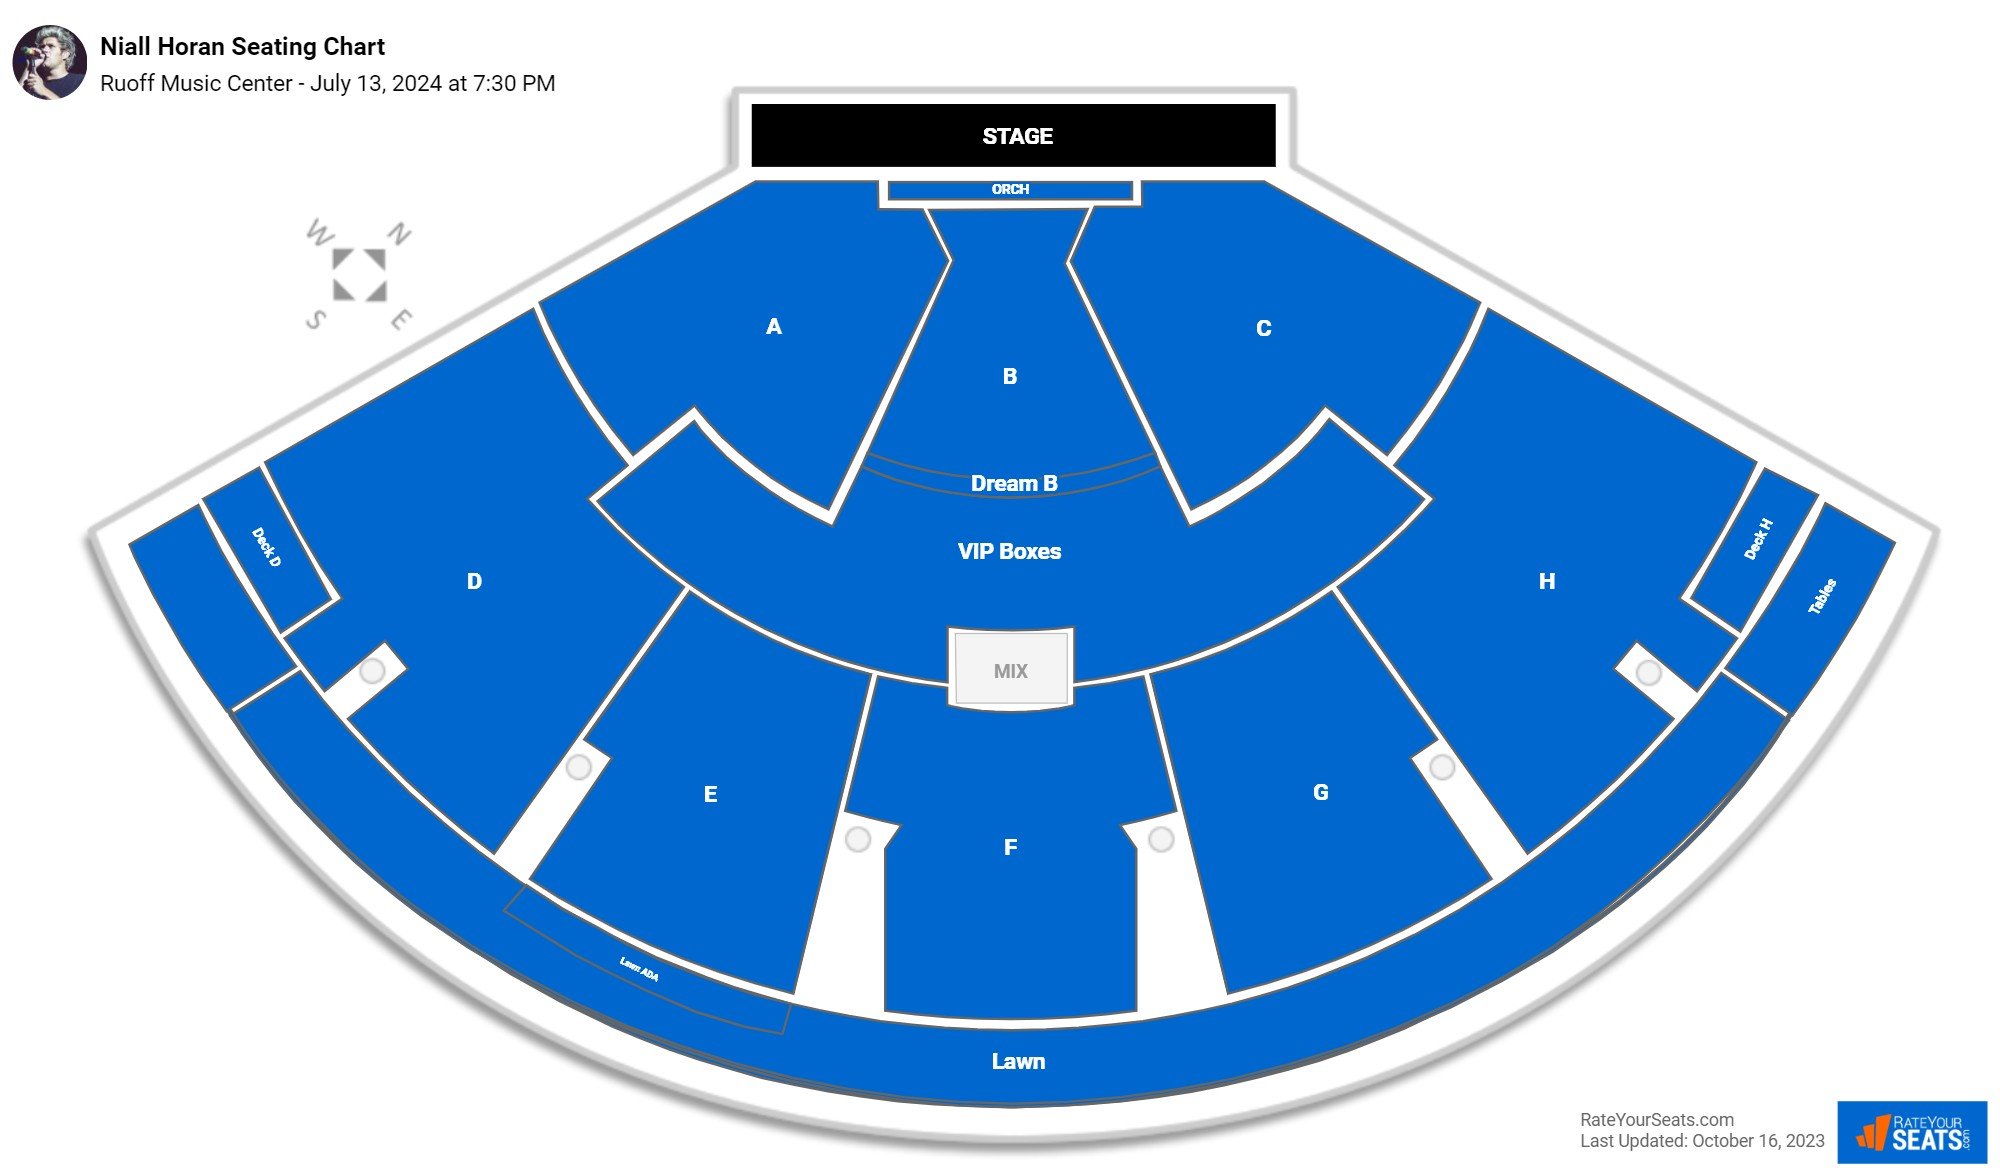 Ruoff Music Center Seating Chart Rateyourseats Com